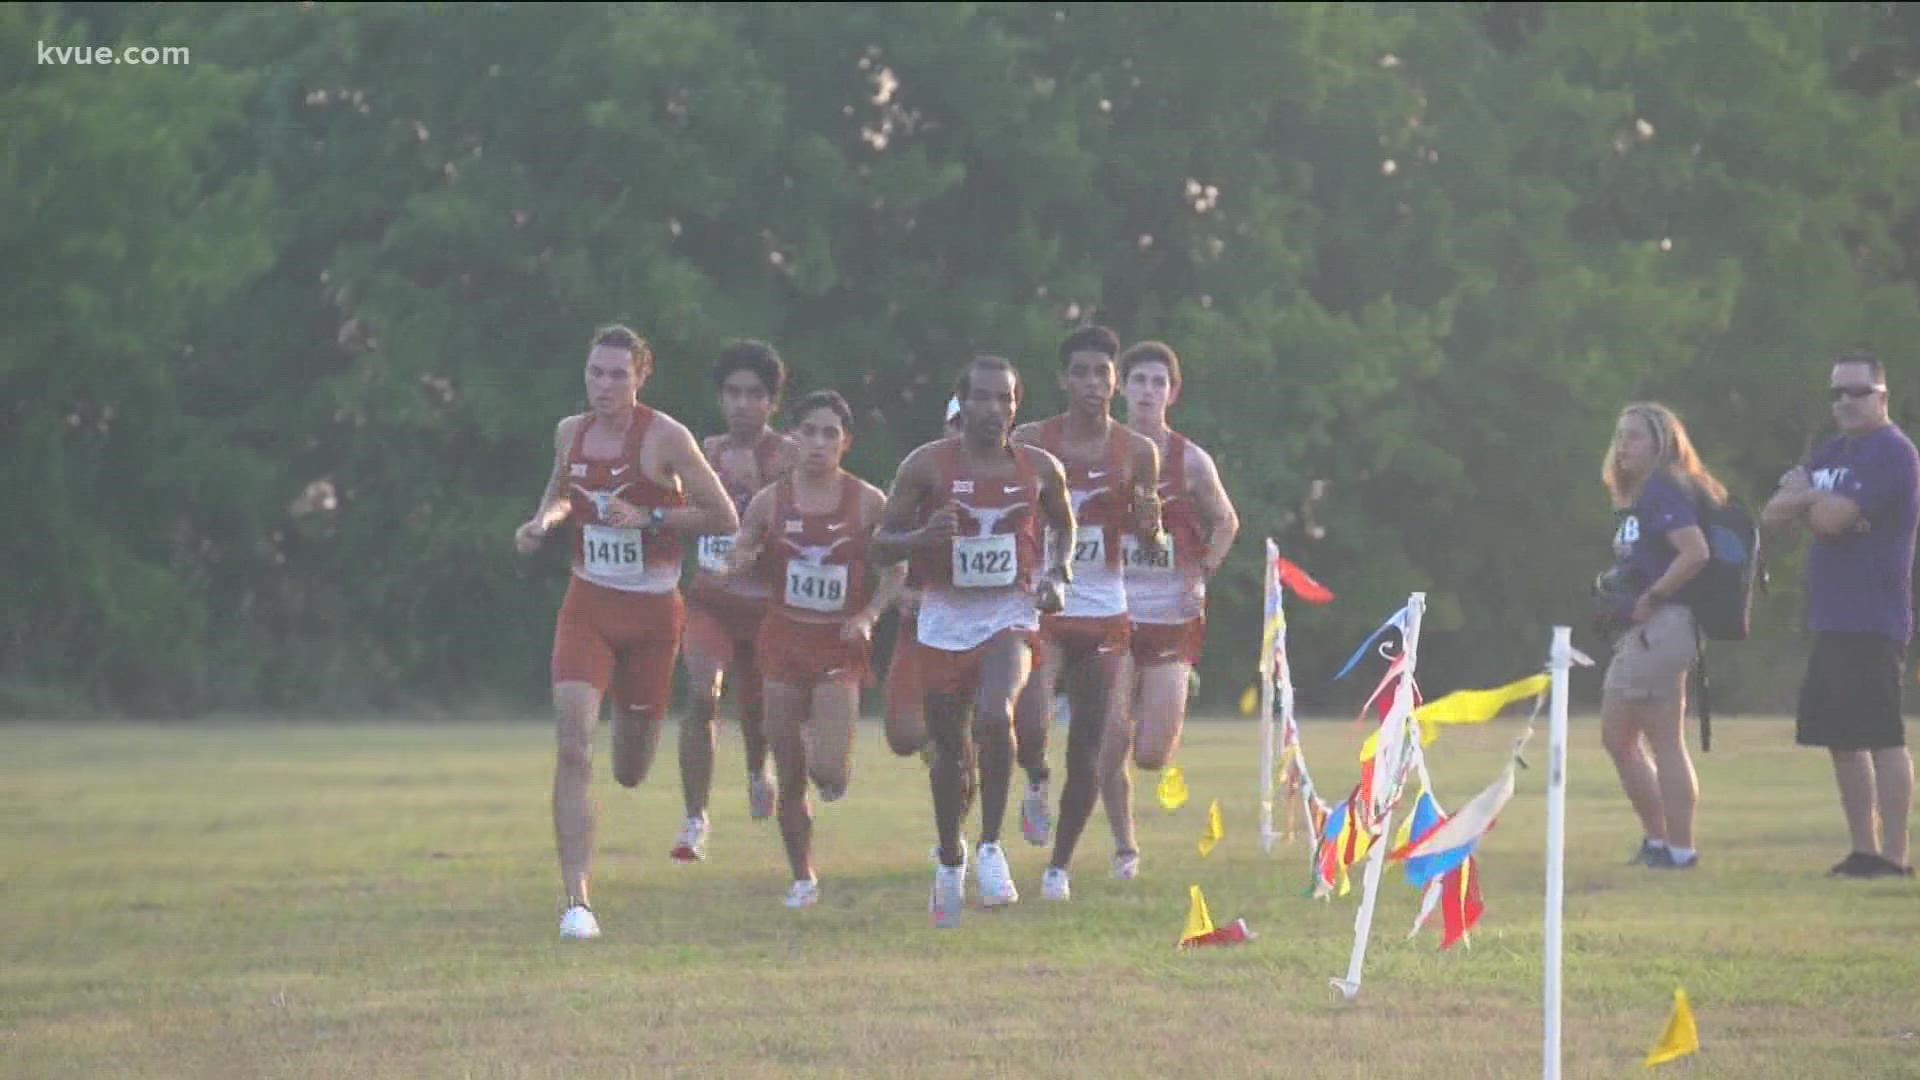 The Longhorns team will compete for a national championship this weekend in cross country.